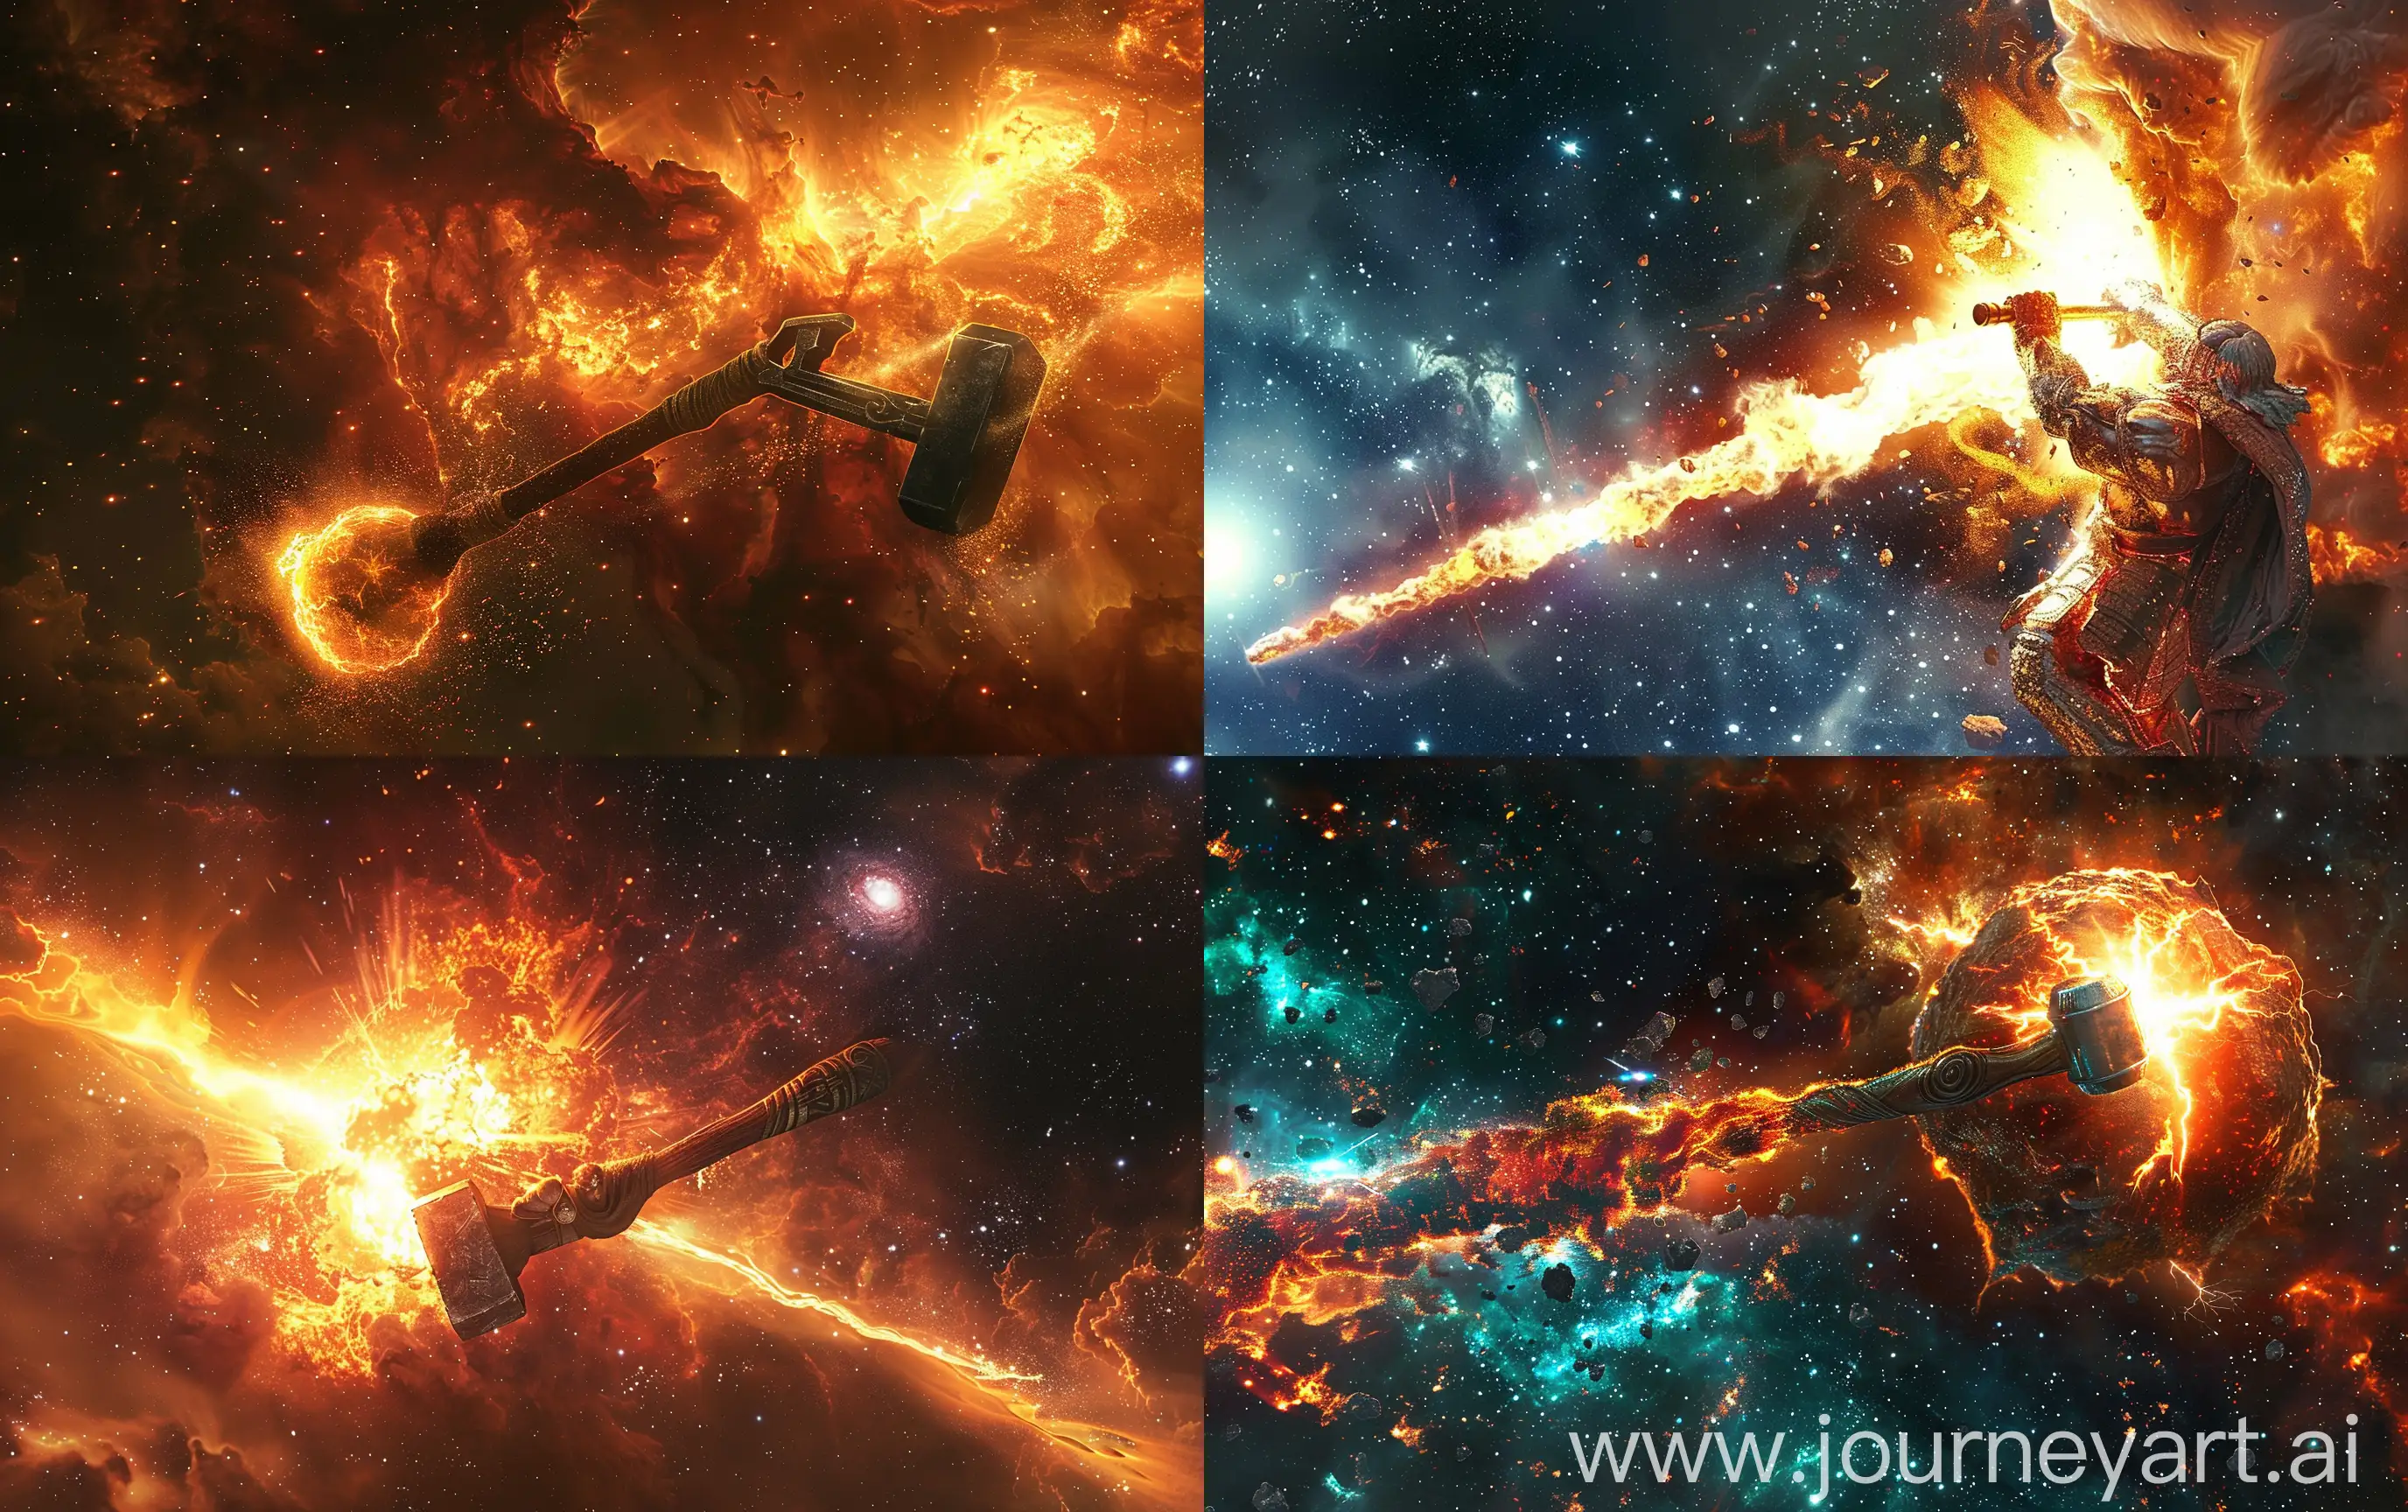 Prometheus-Ancient-Titan-of-Strength-Striking-a-Supernova-with-Forge-Hammer-Amidst-a-Deep-Space-Nebula-Realistic-HiResolution-Cinematic